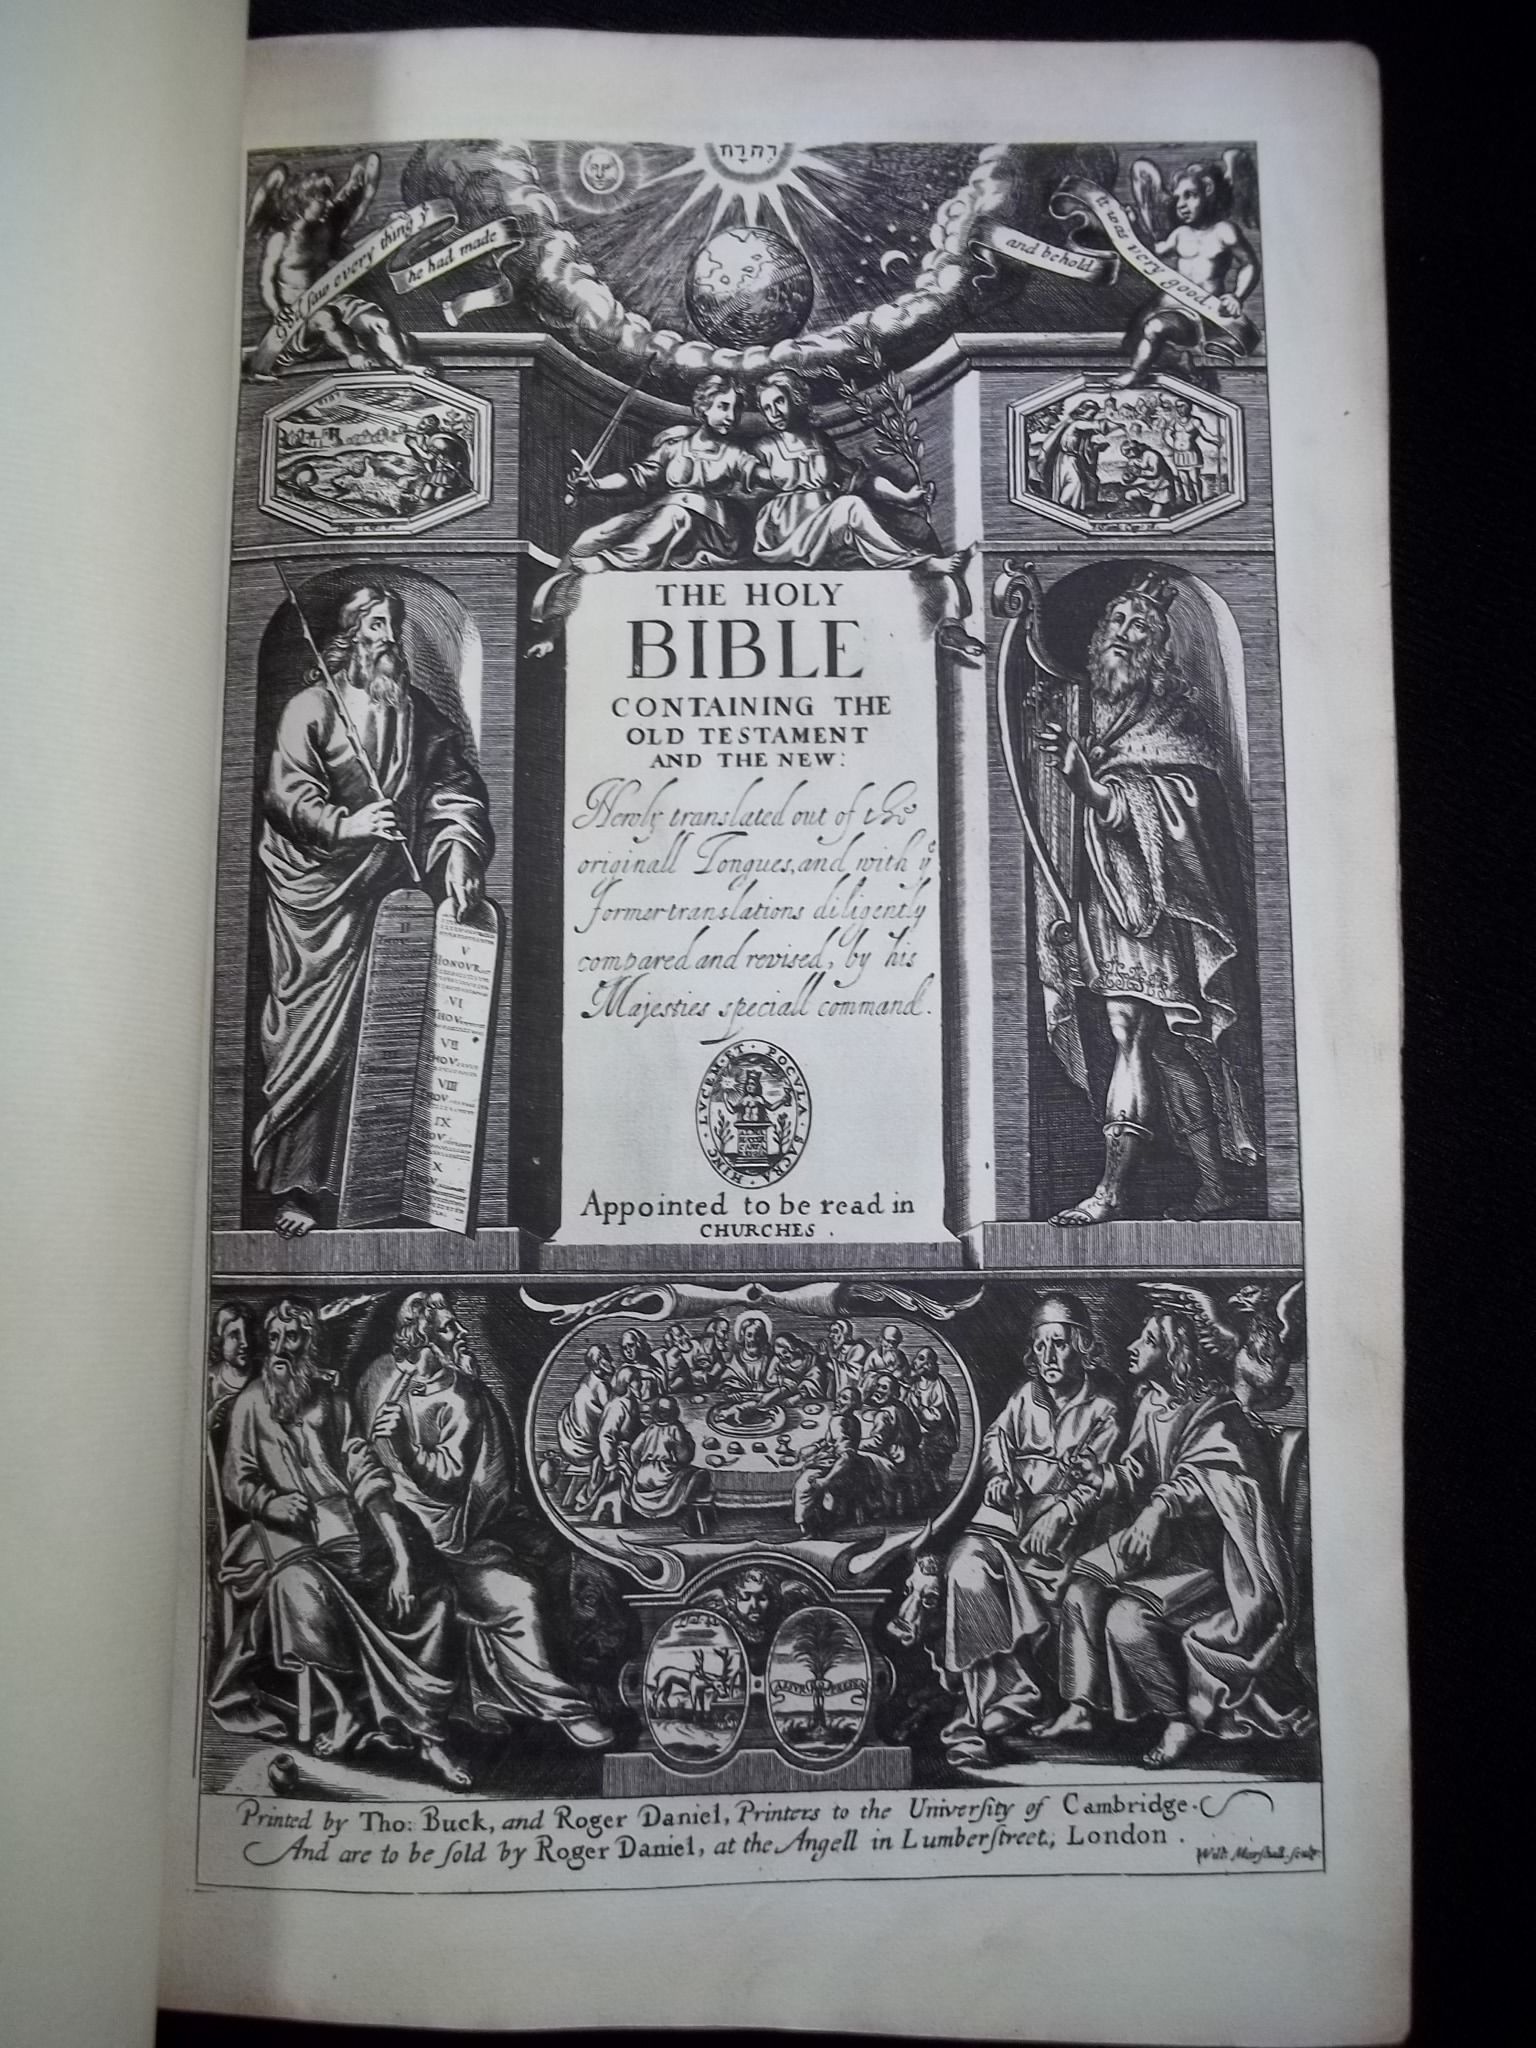 1638 King James Bible Early Folio Antique Huge RARE Fine Leather